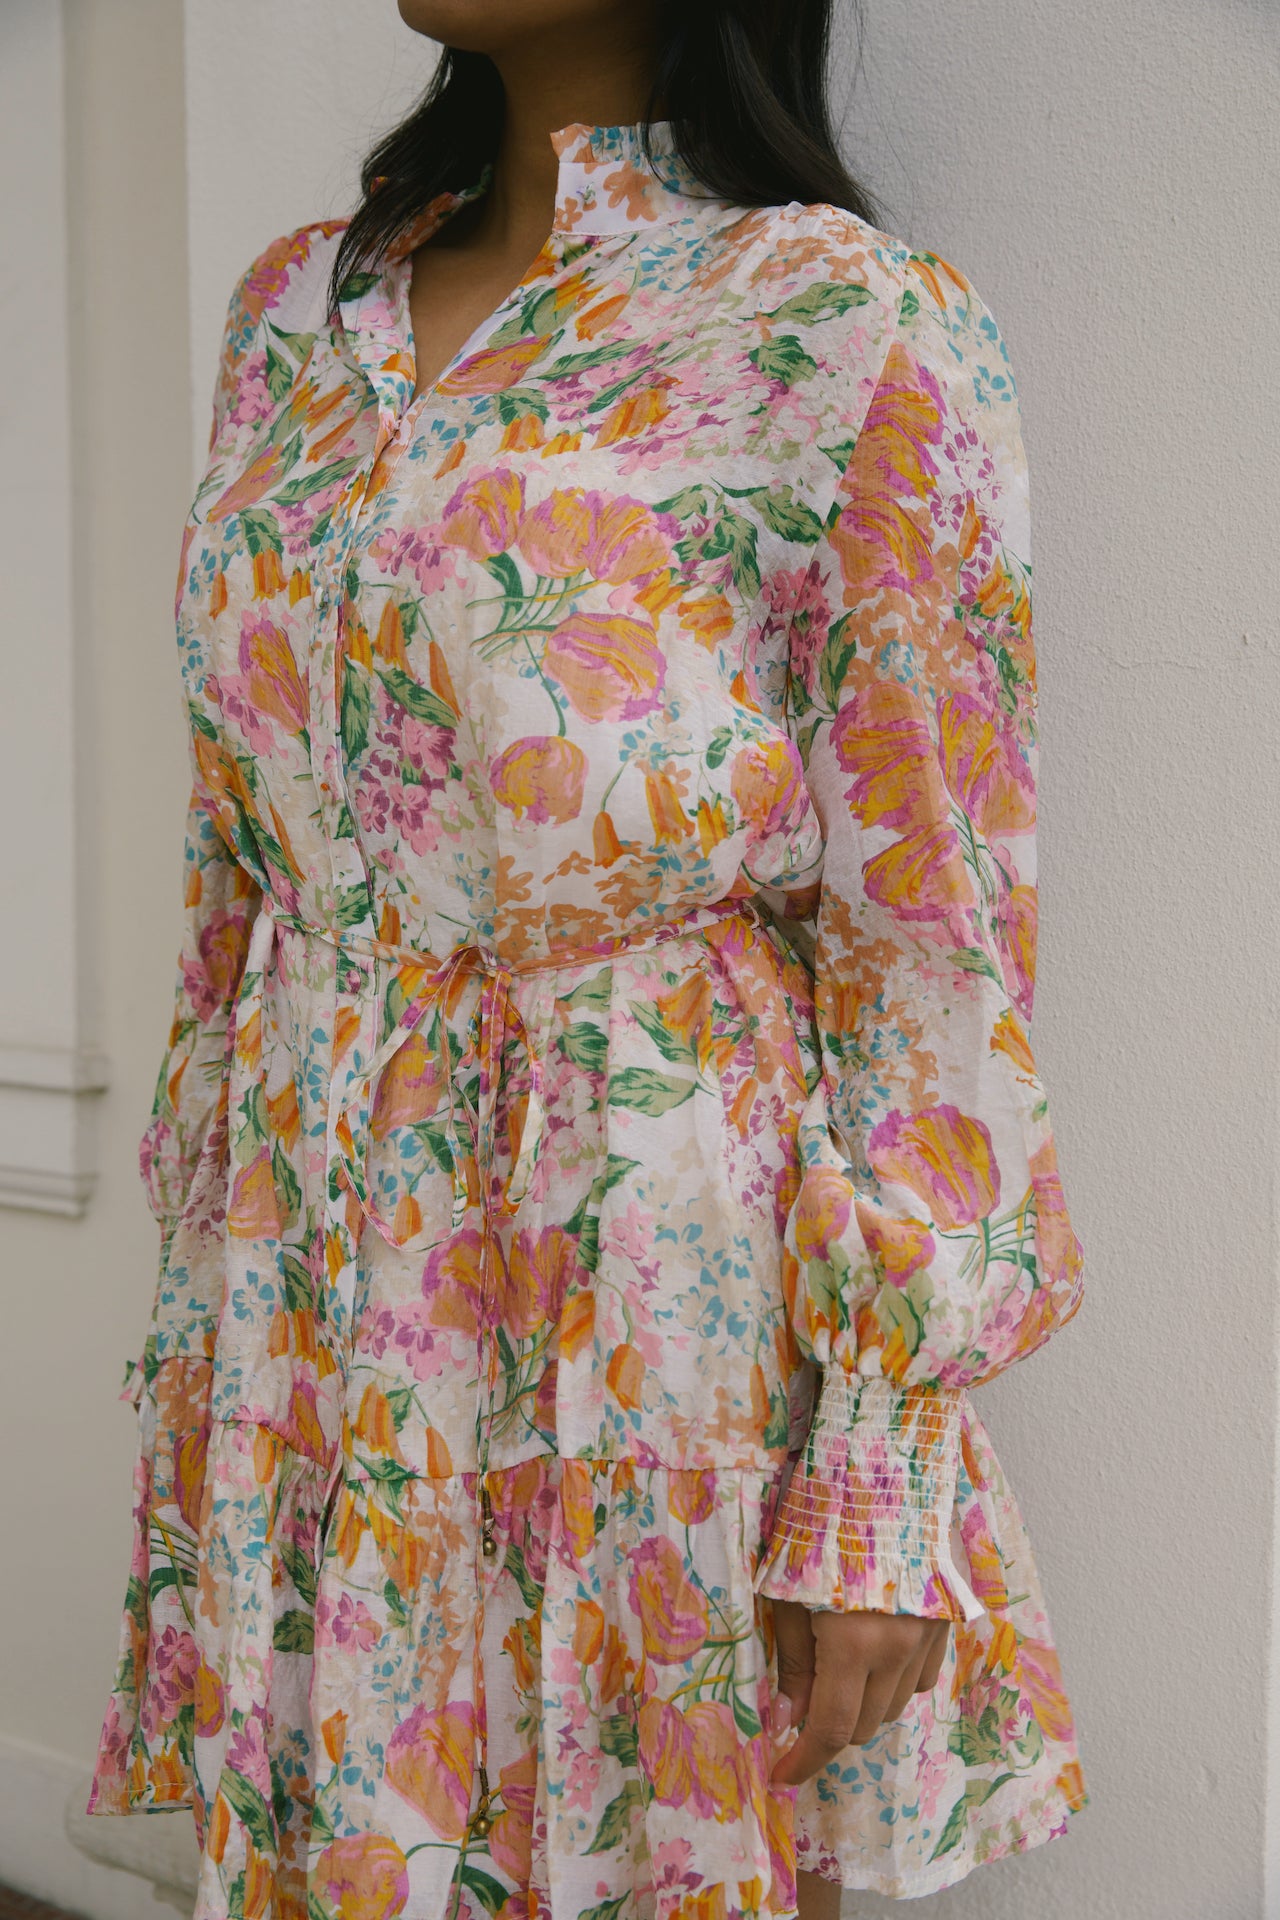 beige with orange floral mini dress with long sleeves and belted